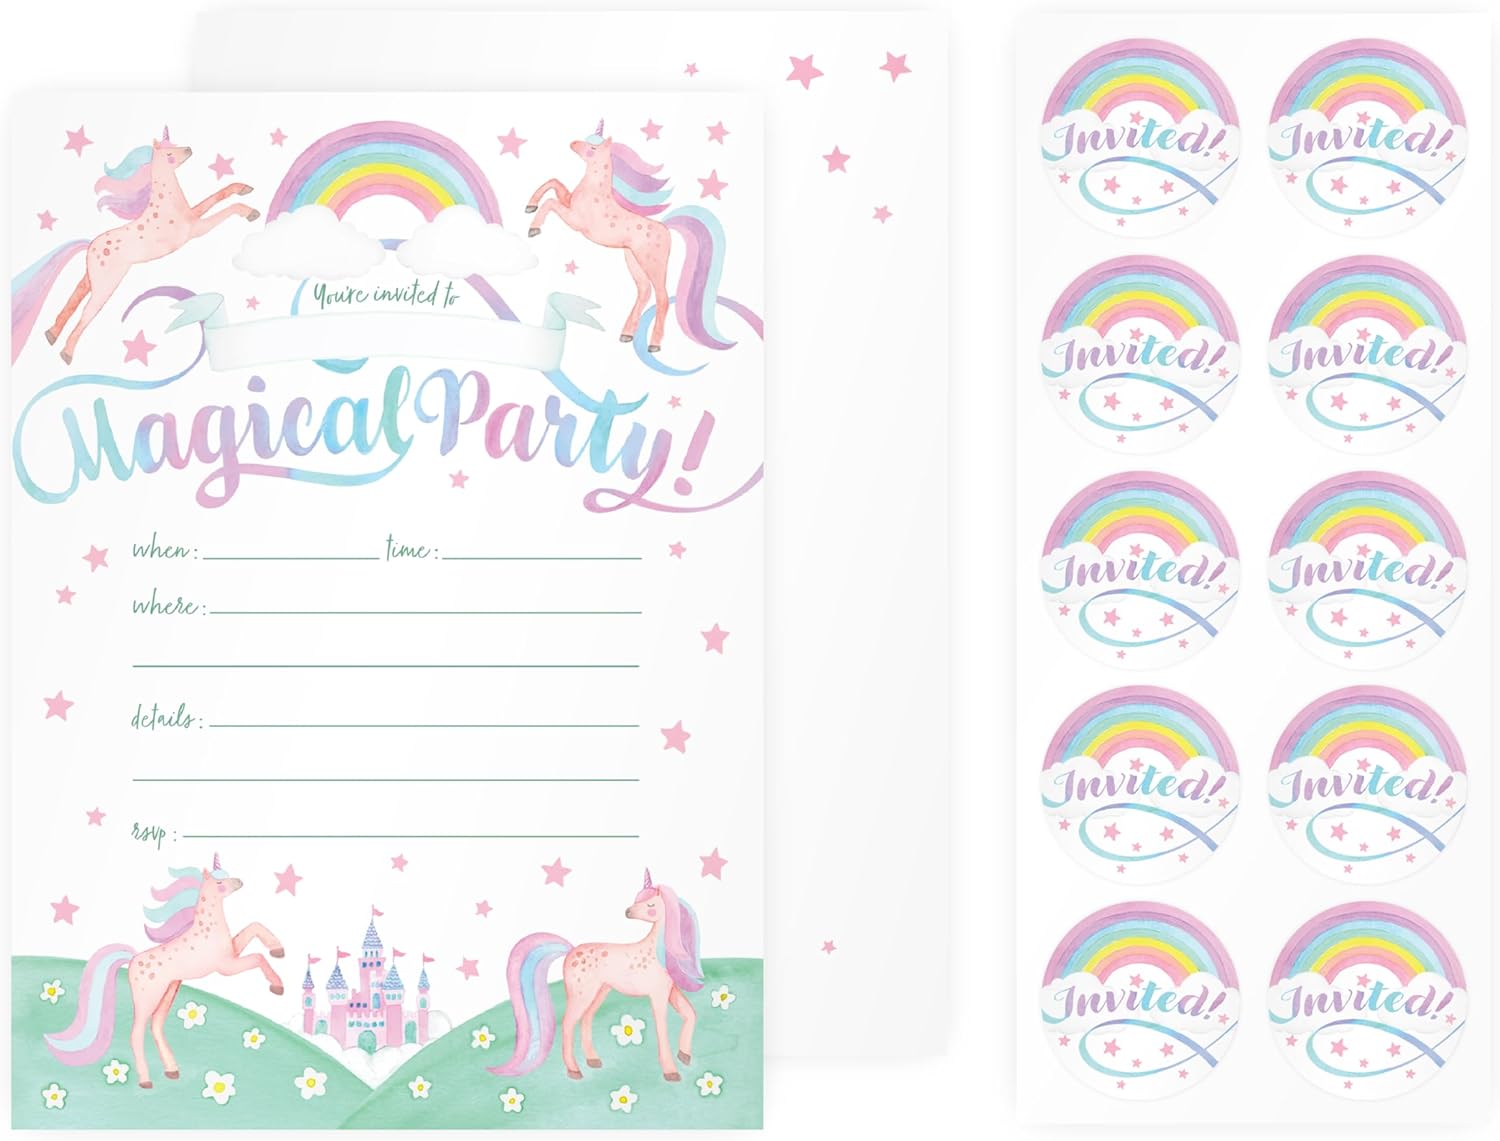 Rileys & Co. Party Invitation Cards with Envelopes and Bonus Stickers, Party Invitation Cards for Boys and Girls with Cute Graphics, Personalized Date, Time, Location, RSVP - Premium Quality for Unforgettable Celebrations! 7x5 Inches - 50 Pack (Unicorn)